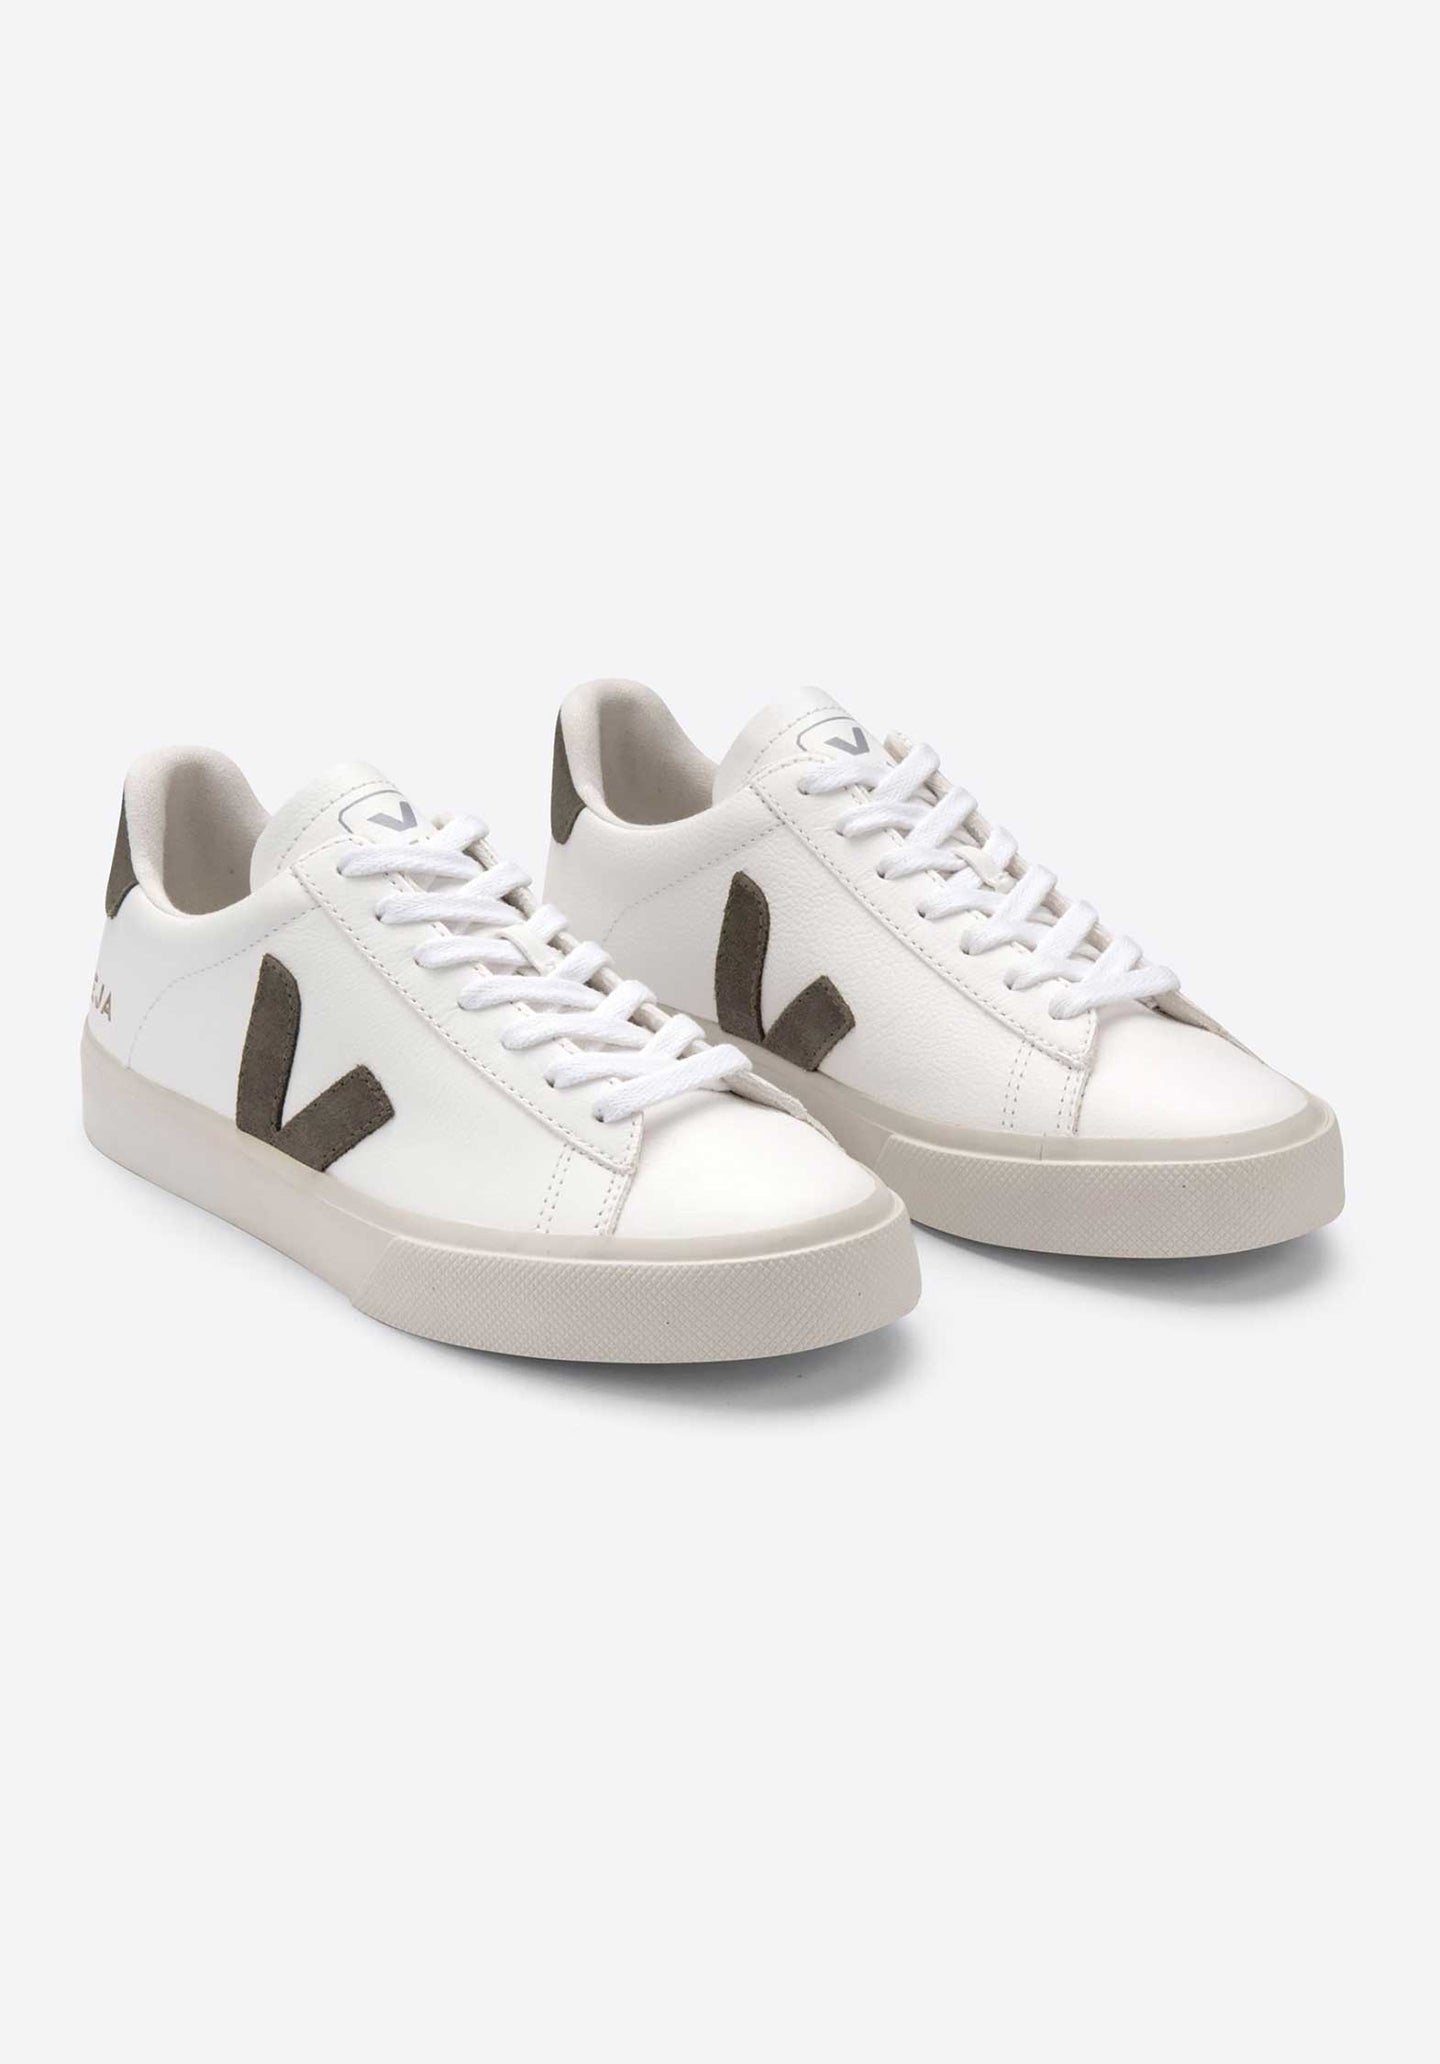 Veja eco-friendly shoes and Veja sneakers collection